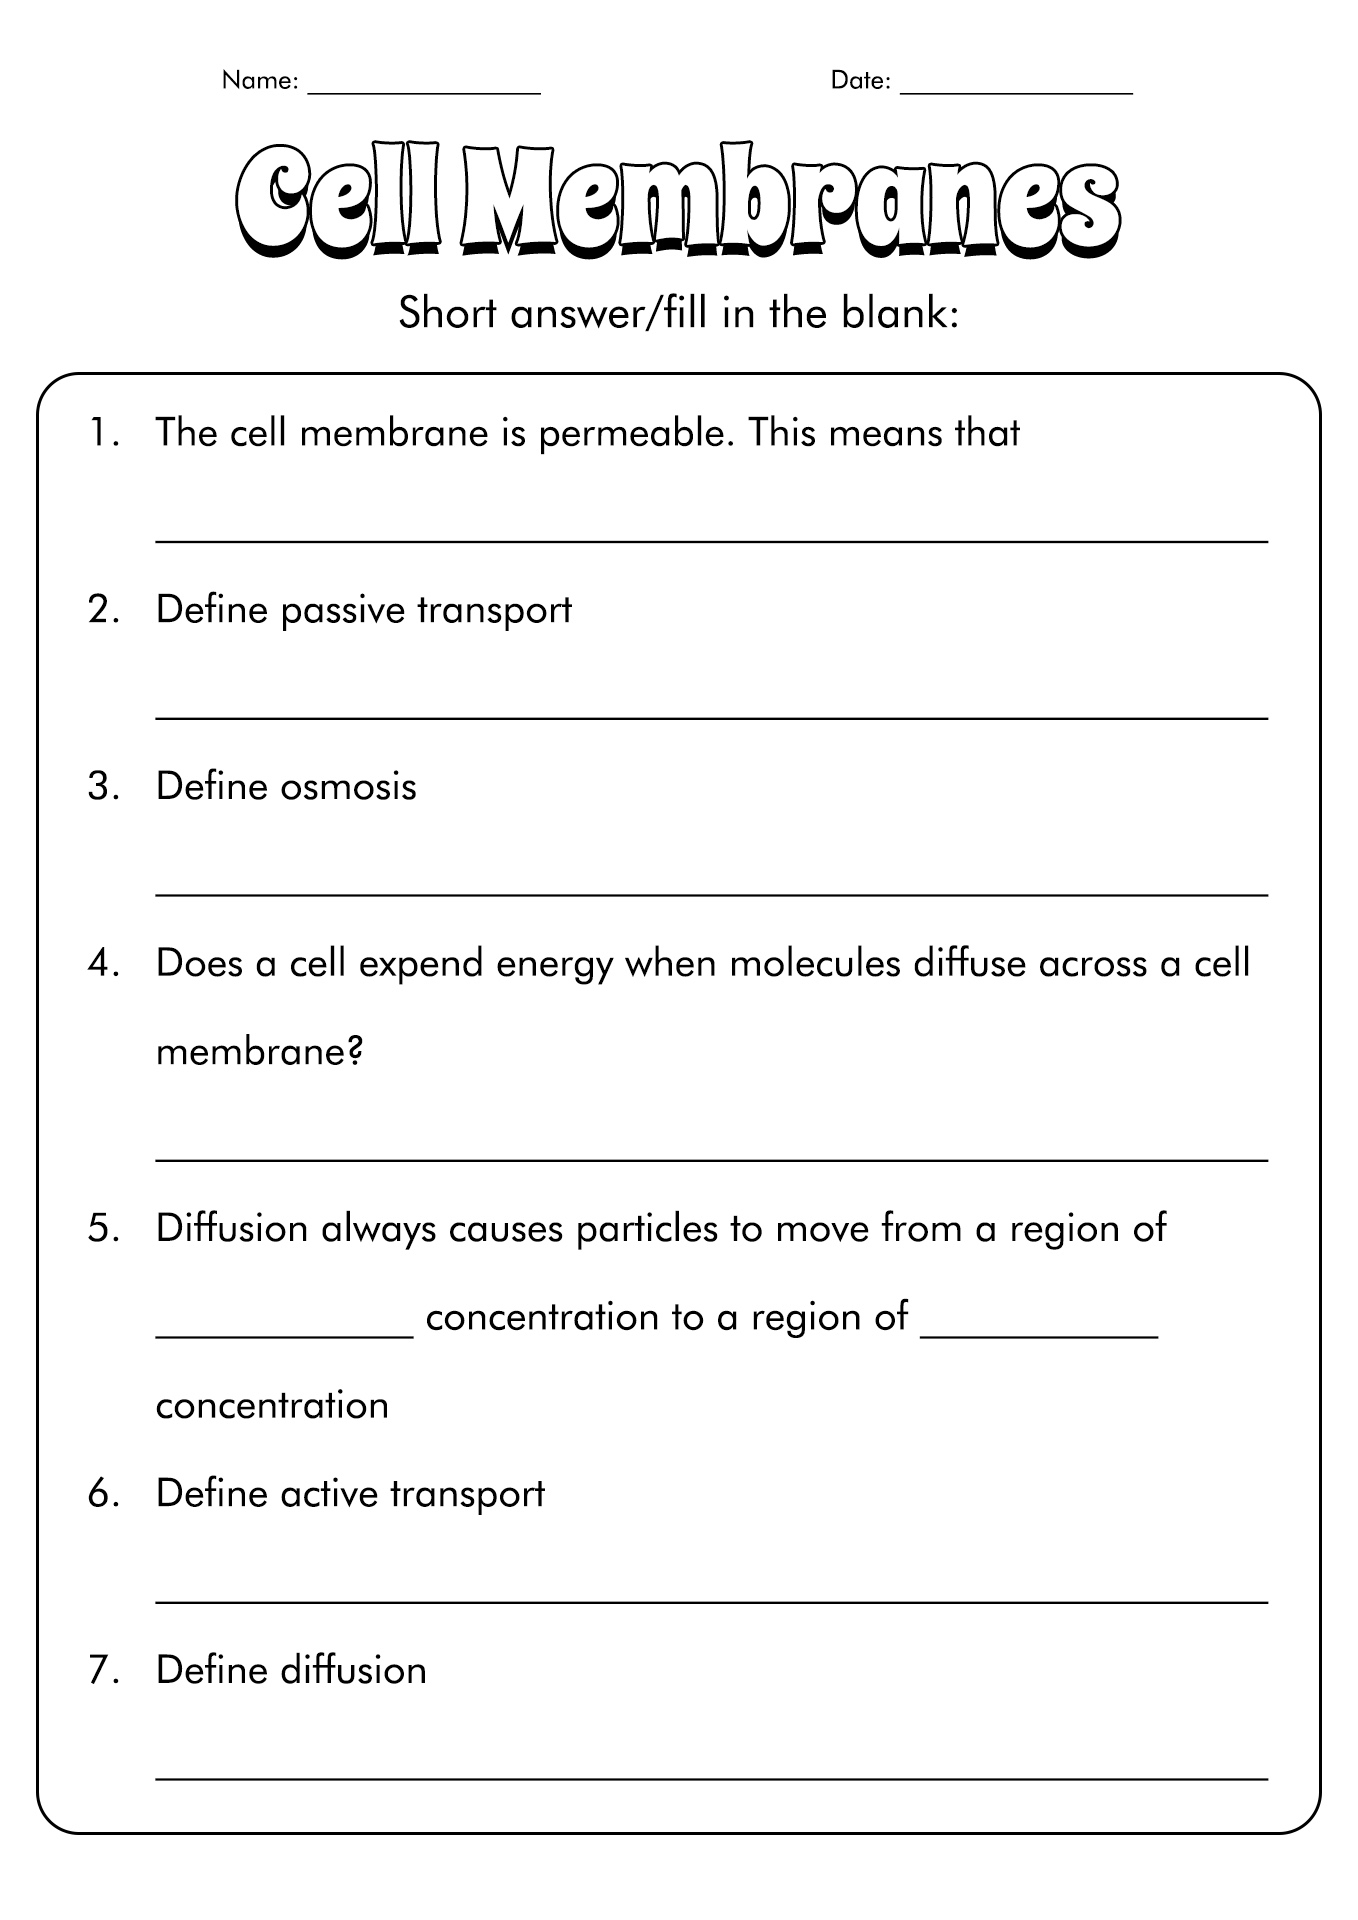 Cell Transport Diffusion and Osmosis Worksheet